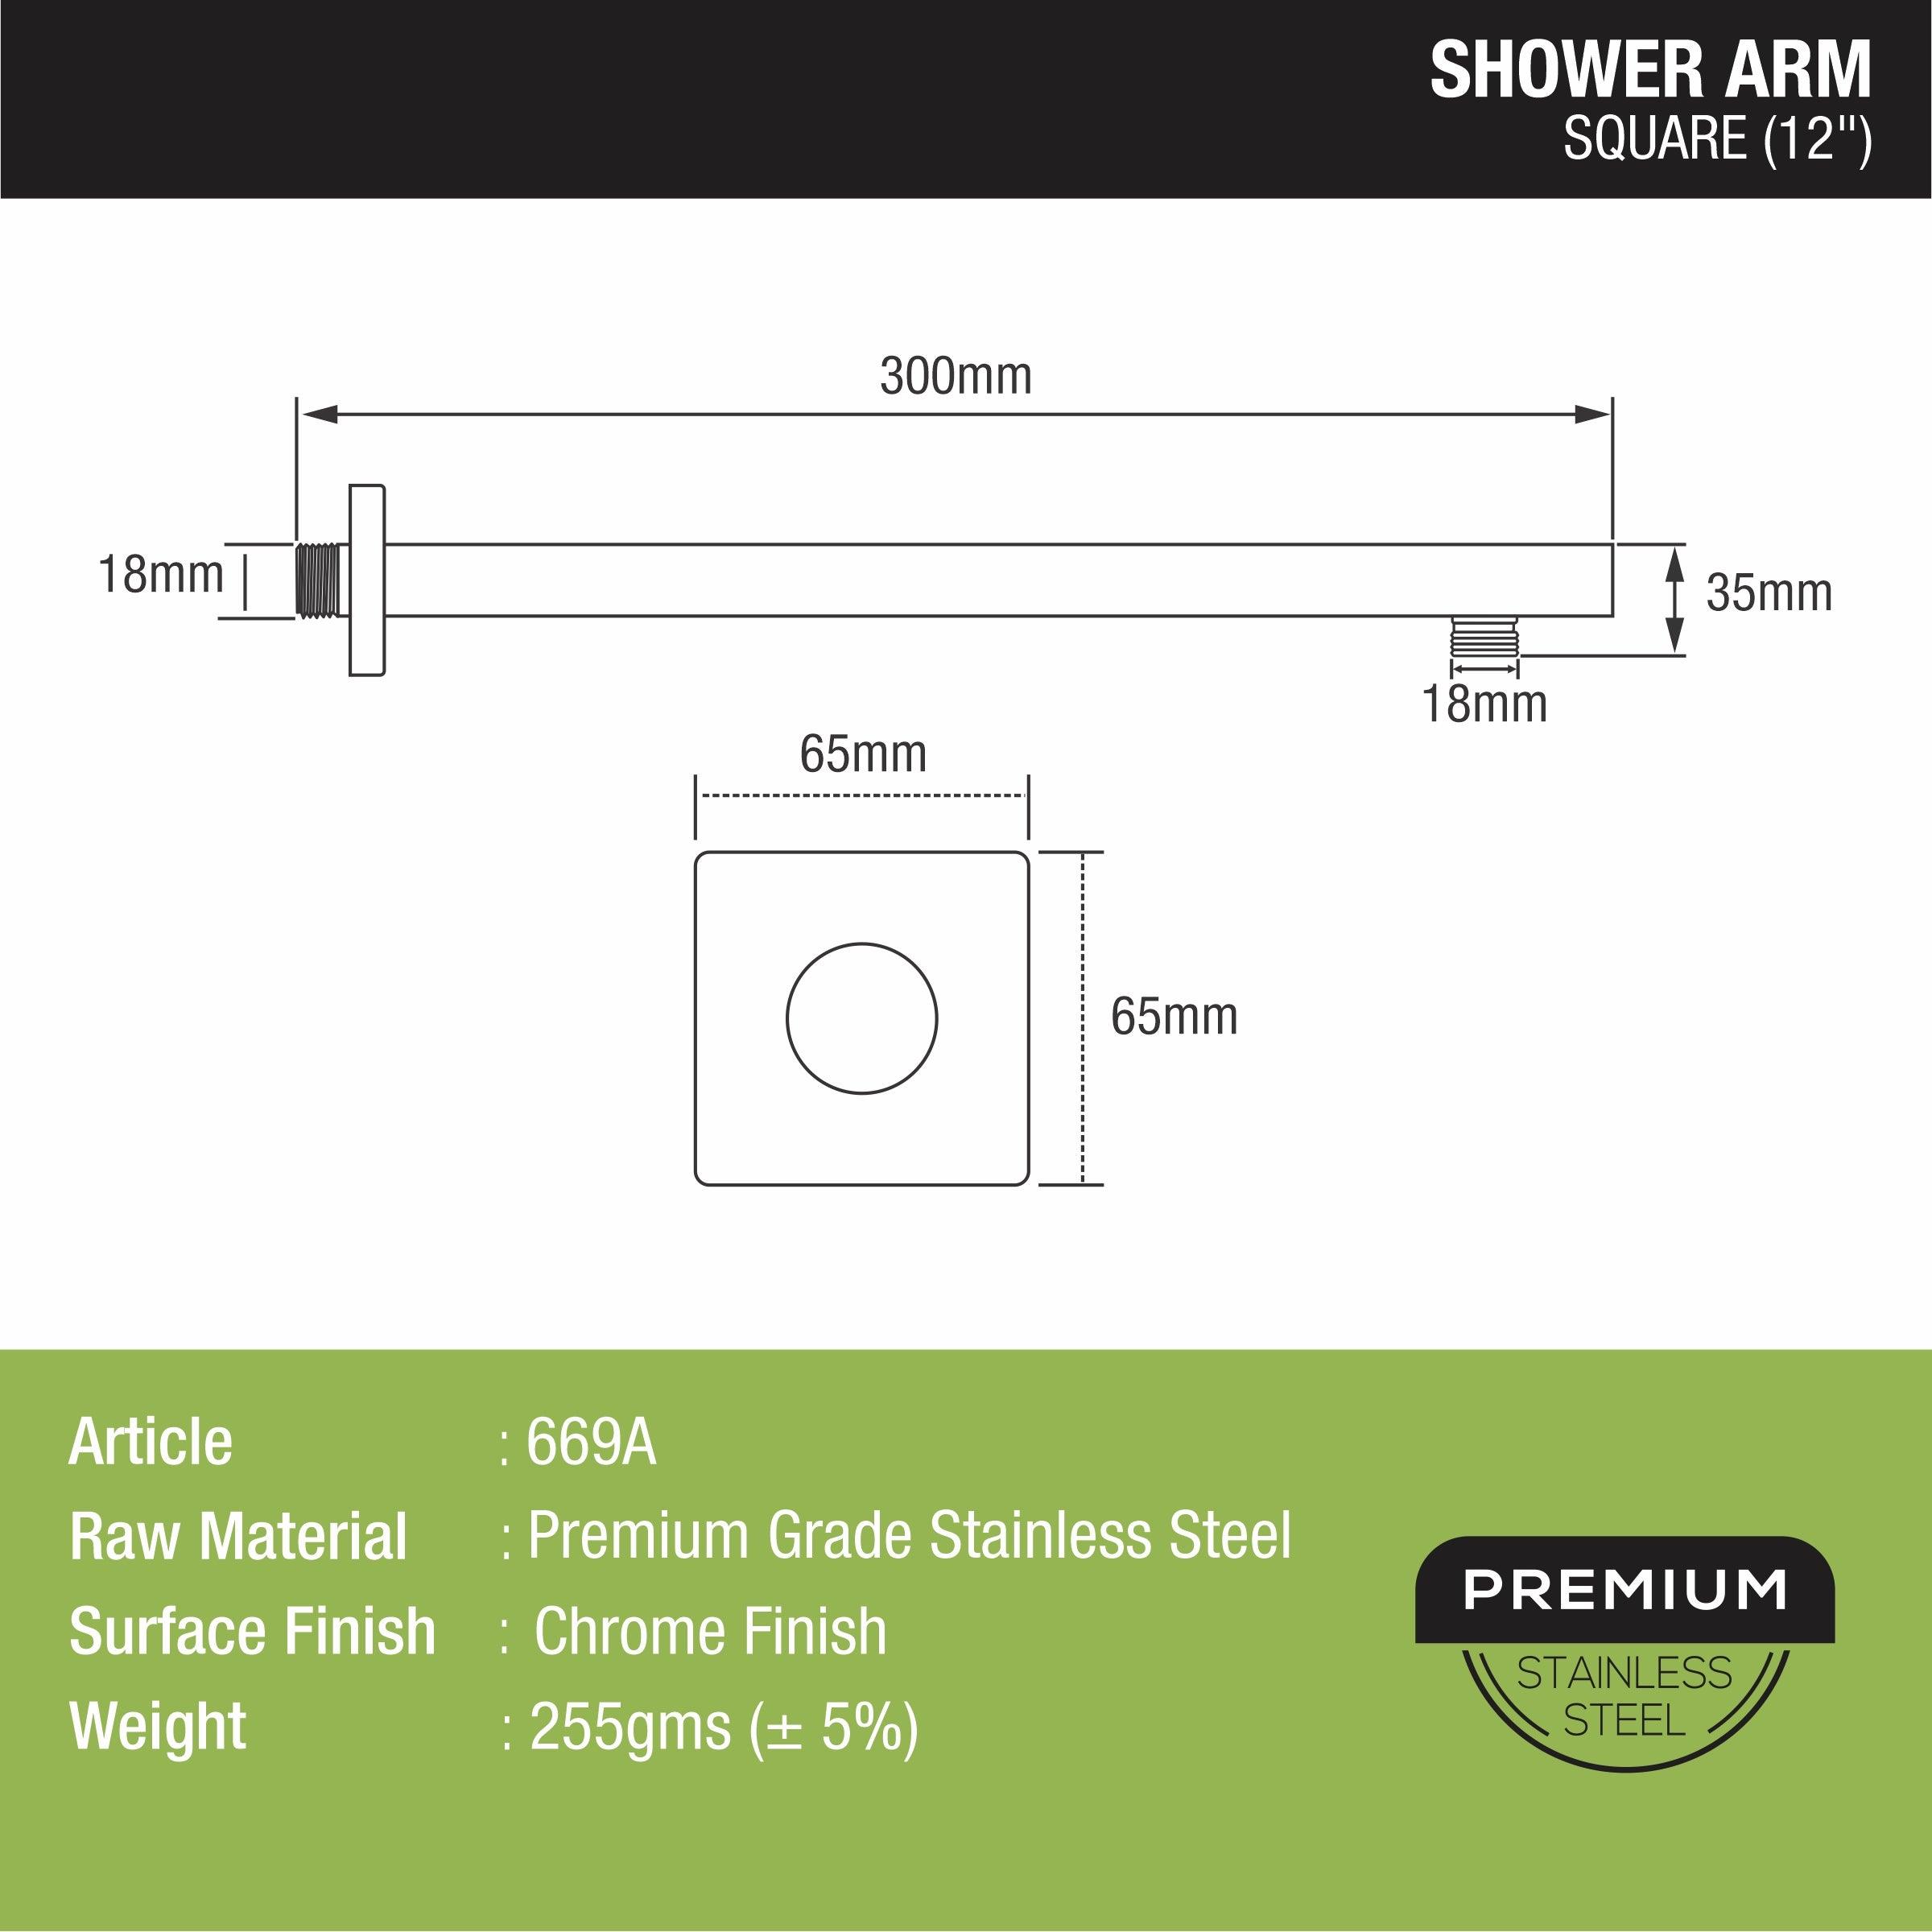 Square Shower Arm (12 Inches) sizes and dimensions